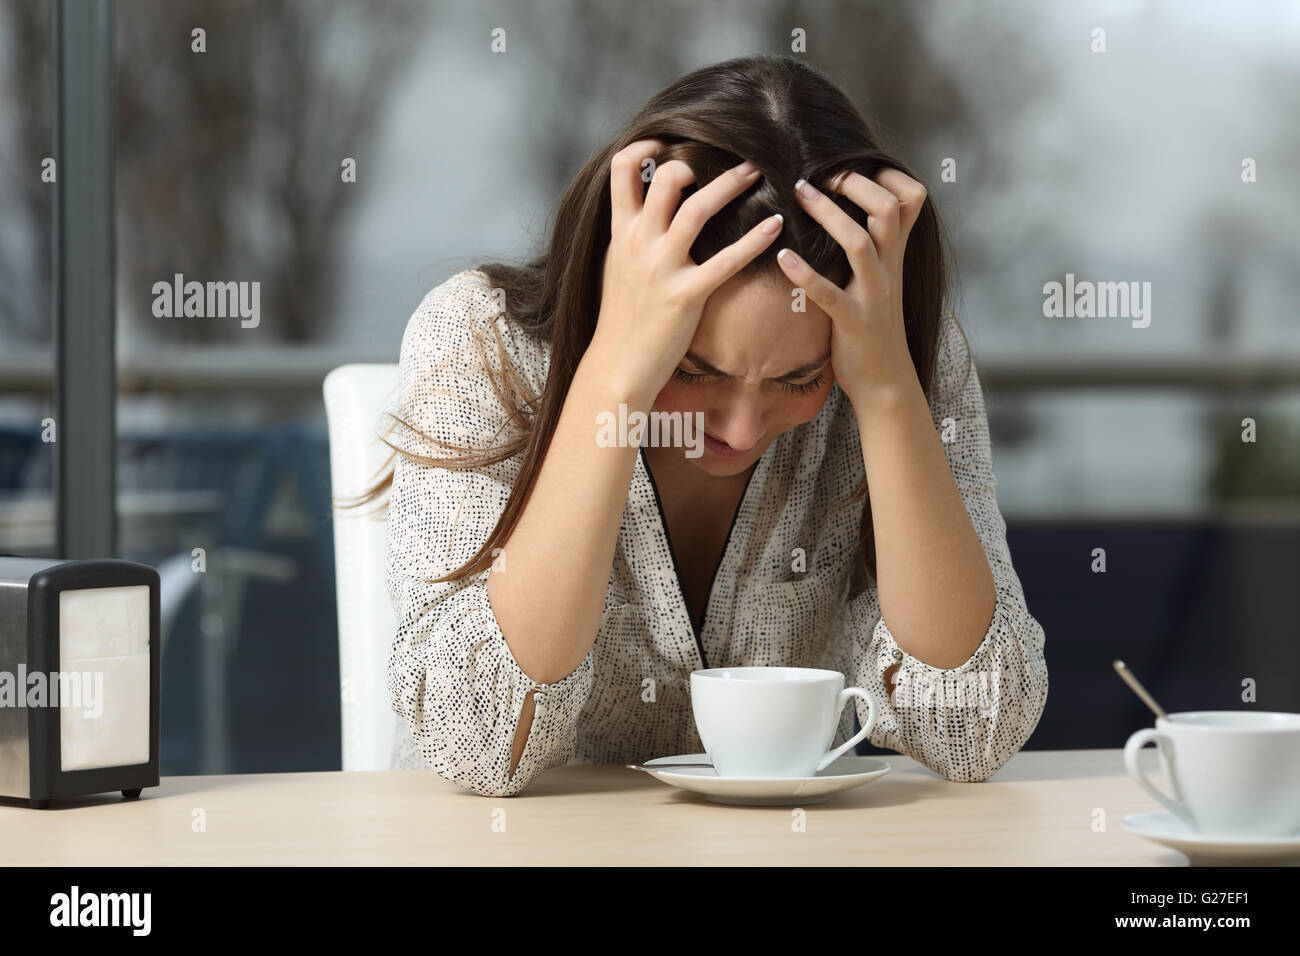 Sad and depressed woman alone in a lonely bar after a break up with a rainy winter day outdoor in the background Stock Photo